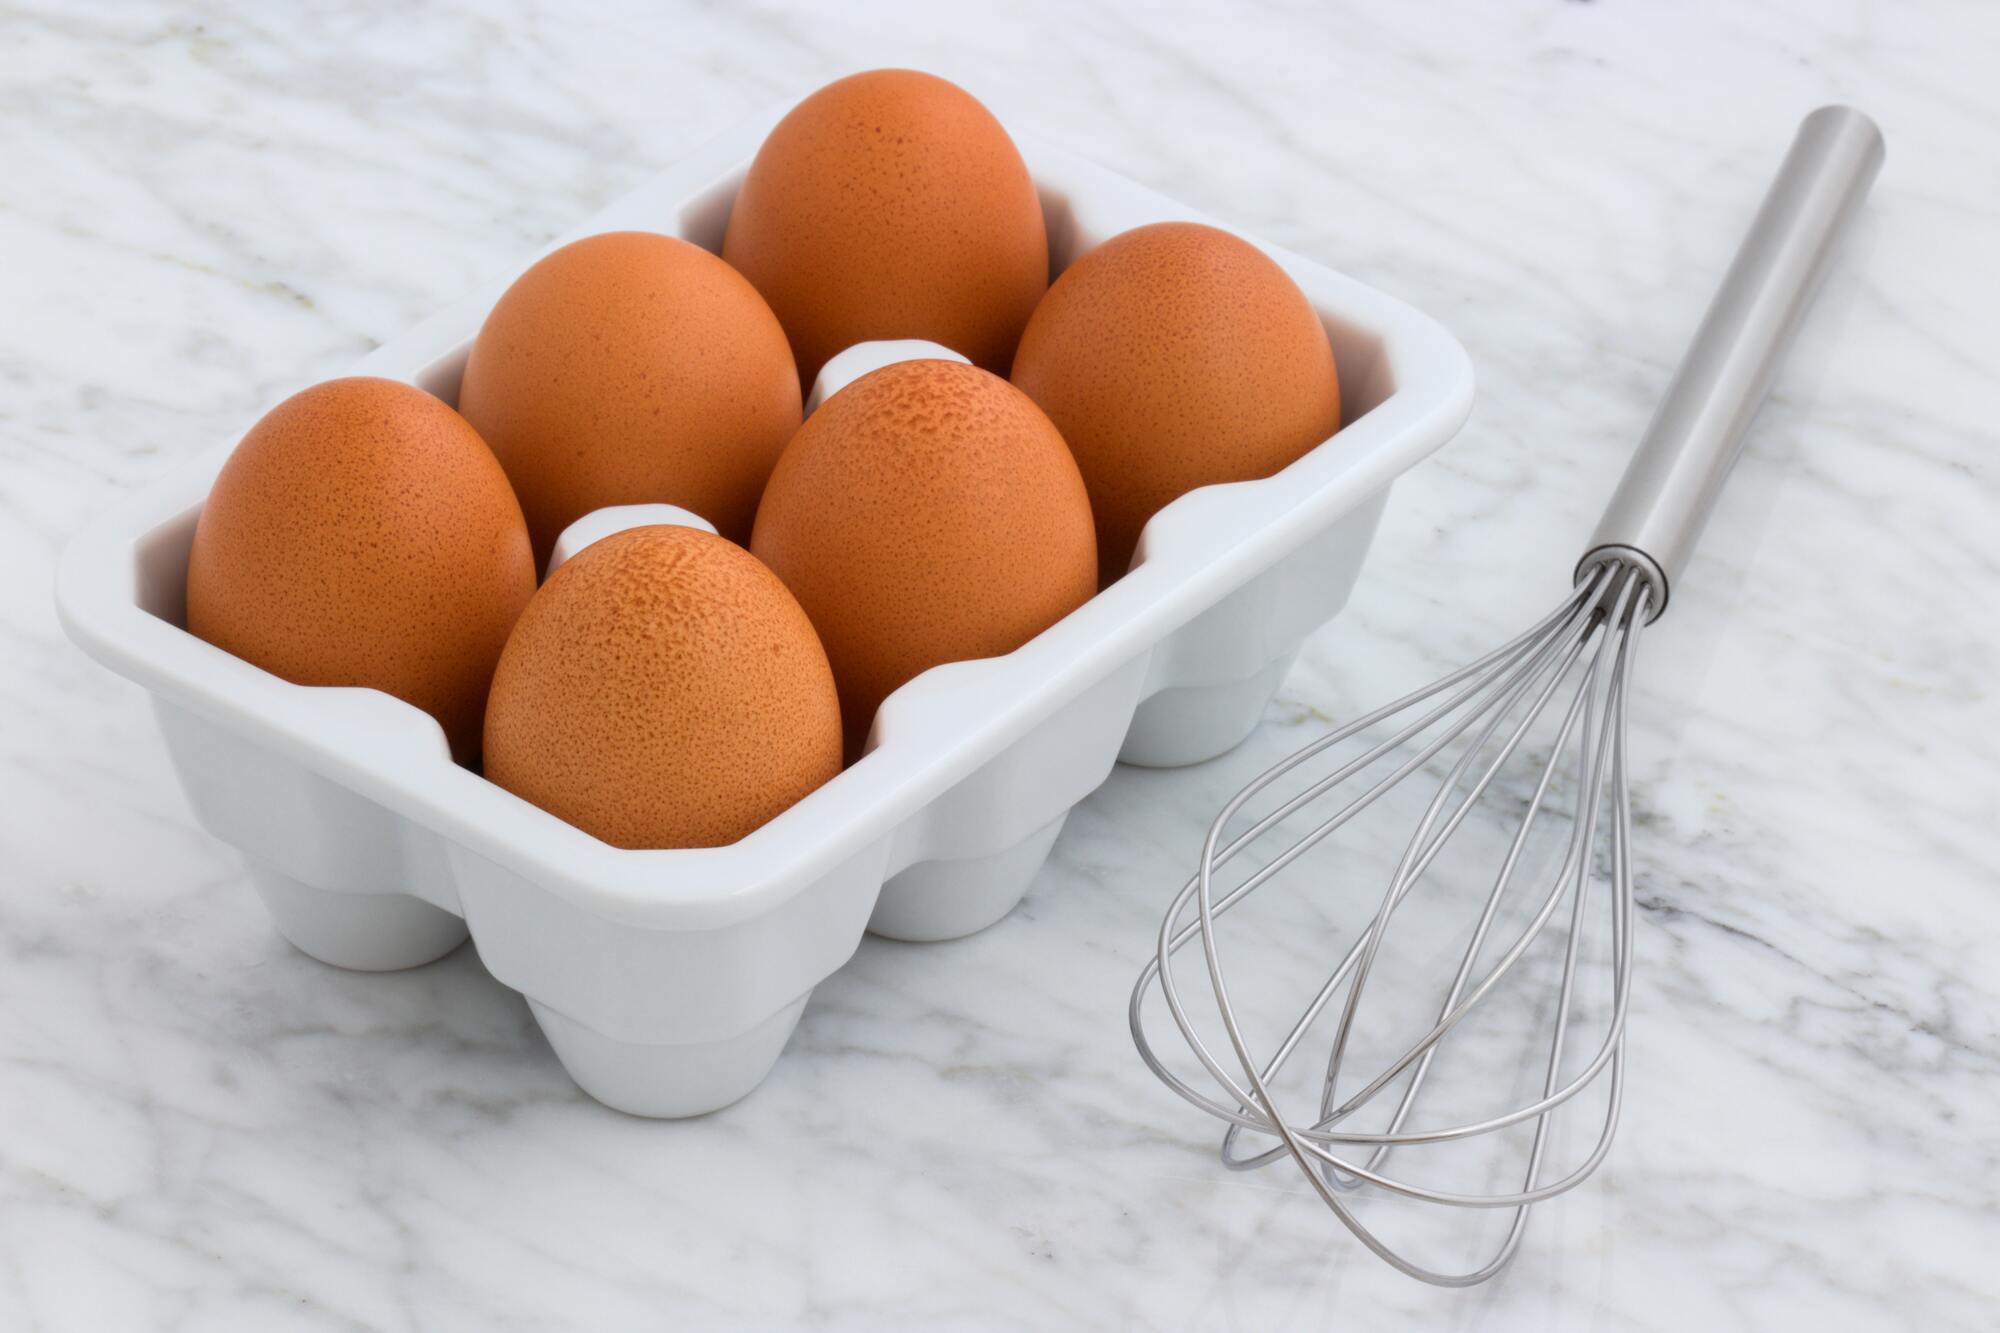 How to check the freshness of eggs at home